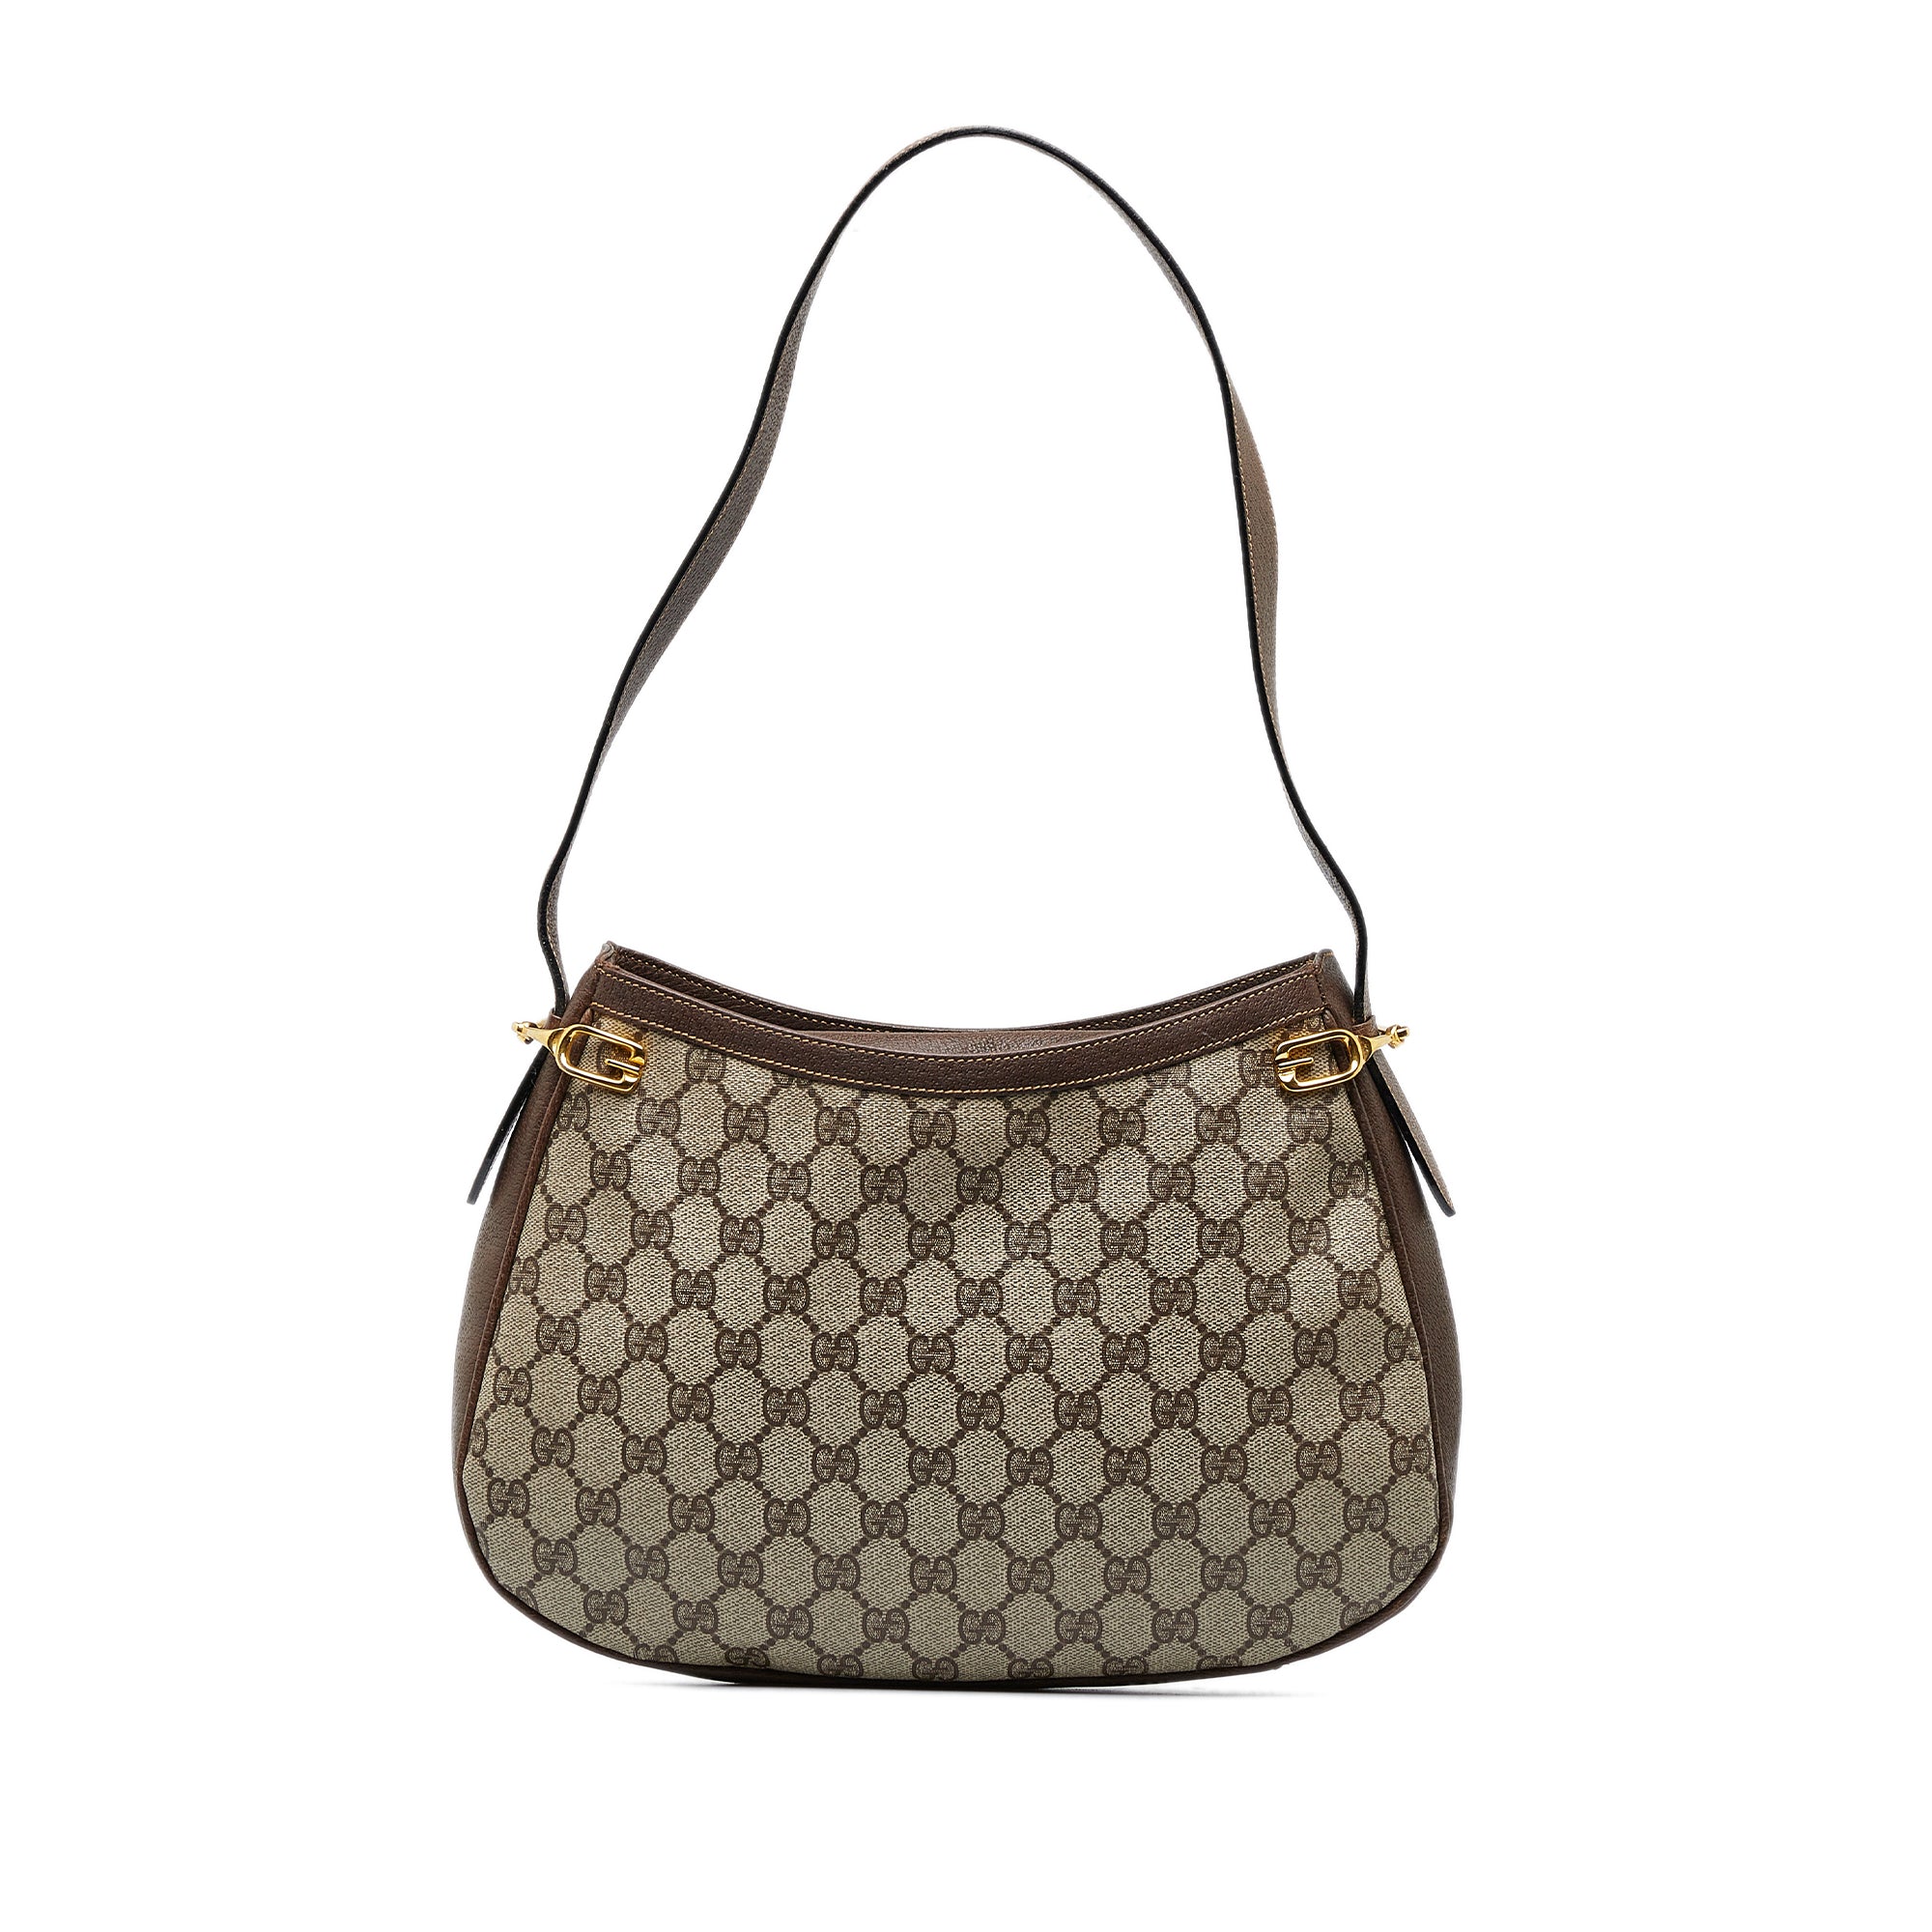 GUCCI Ophidia leather-trimmed printed coated-canvas shoulder bag